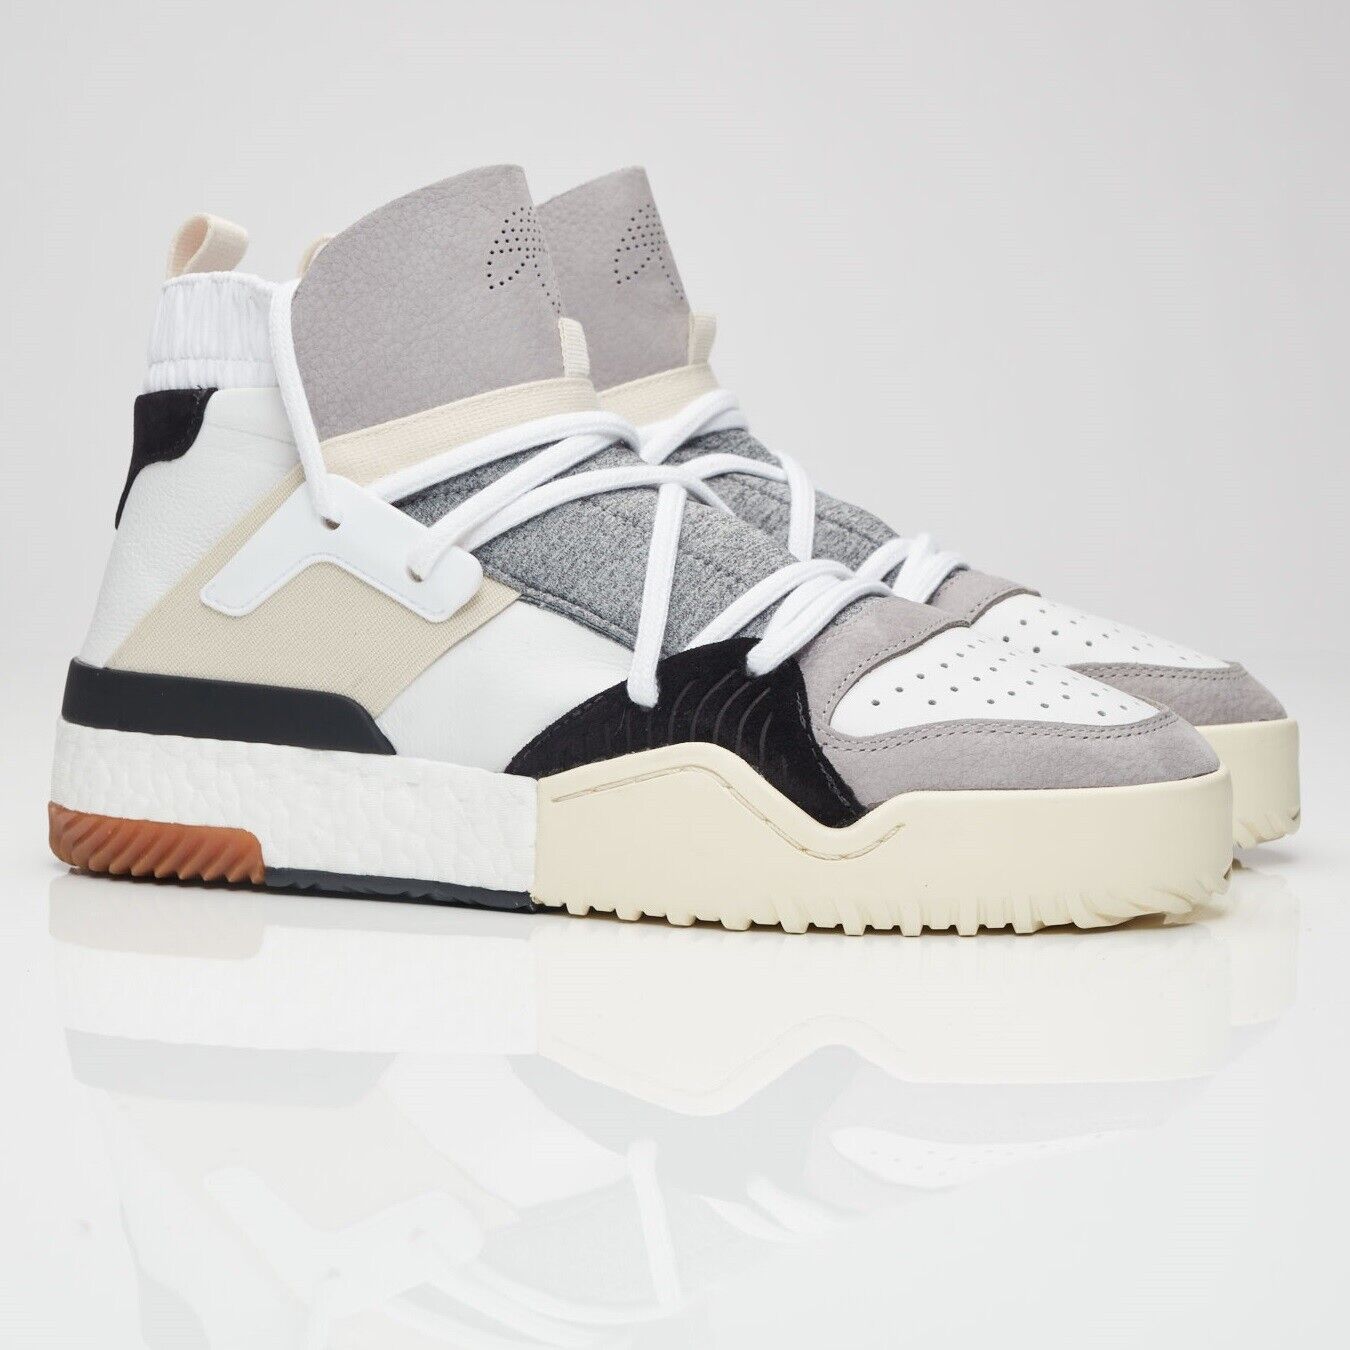 adidas X Alexander Wang BBALL Boost Leather White CM7824 SIZES 4 5 5.5 6 6.5 7